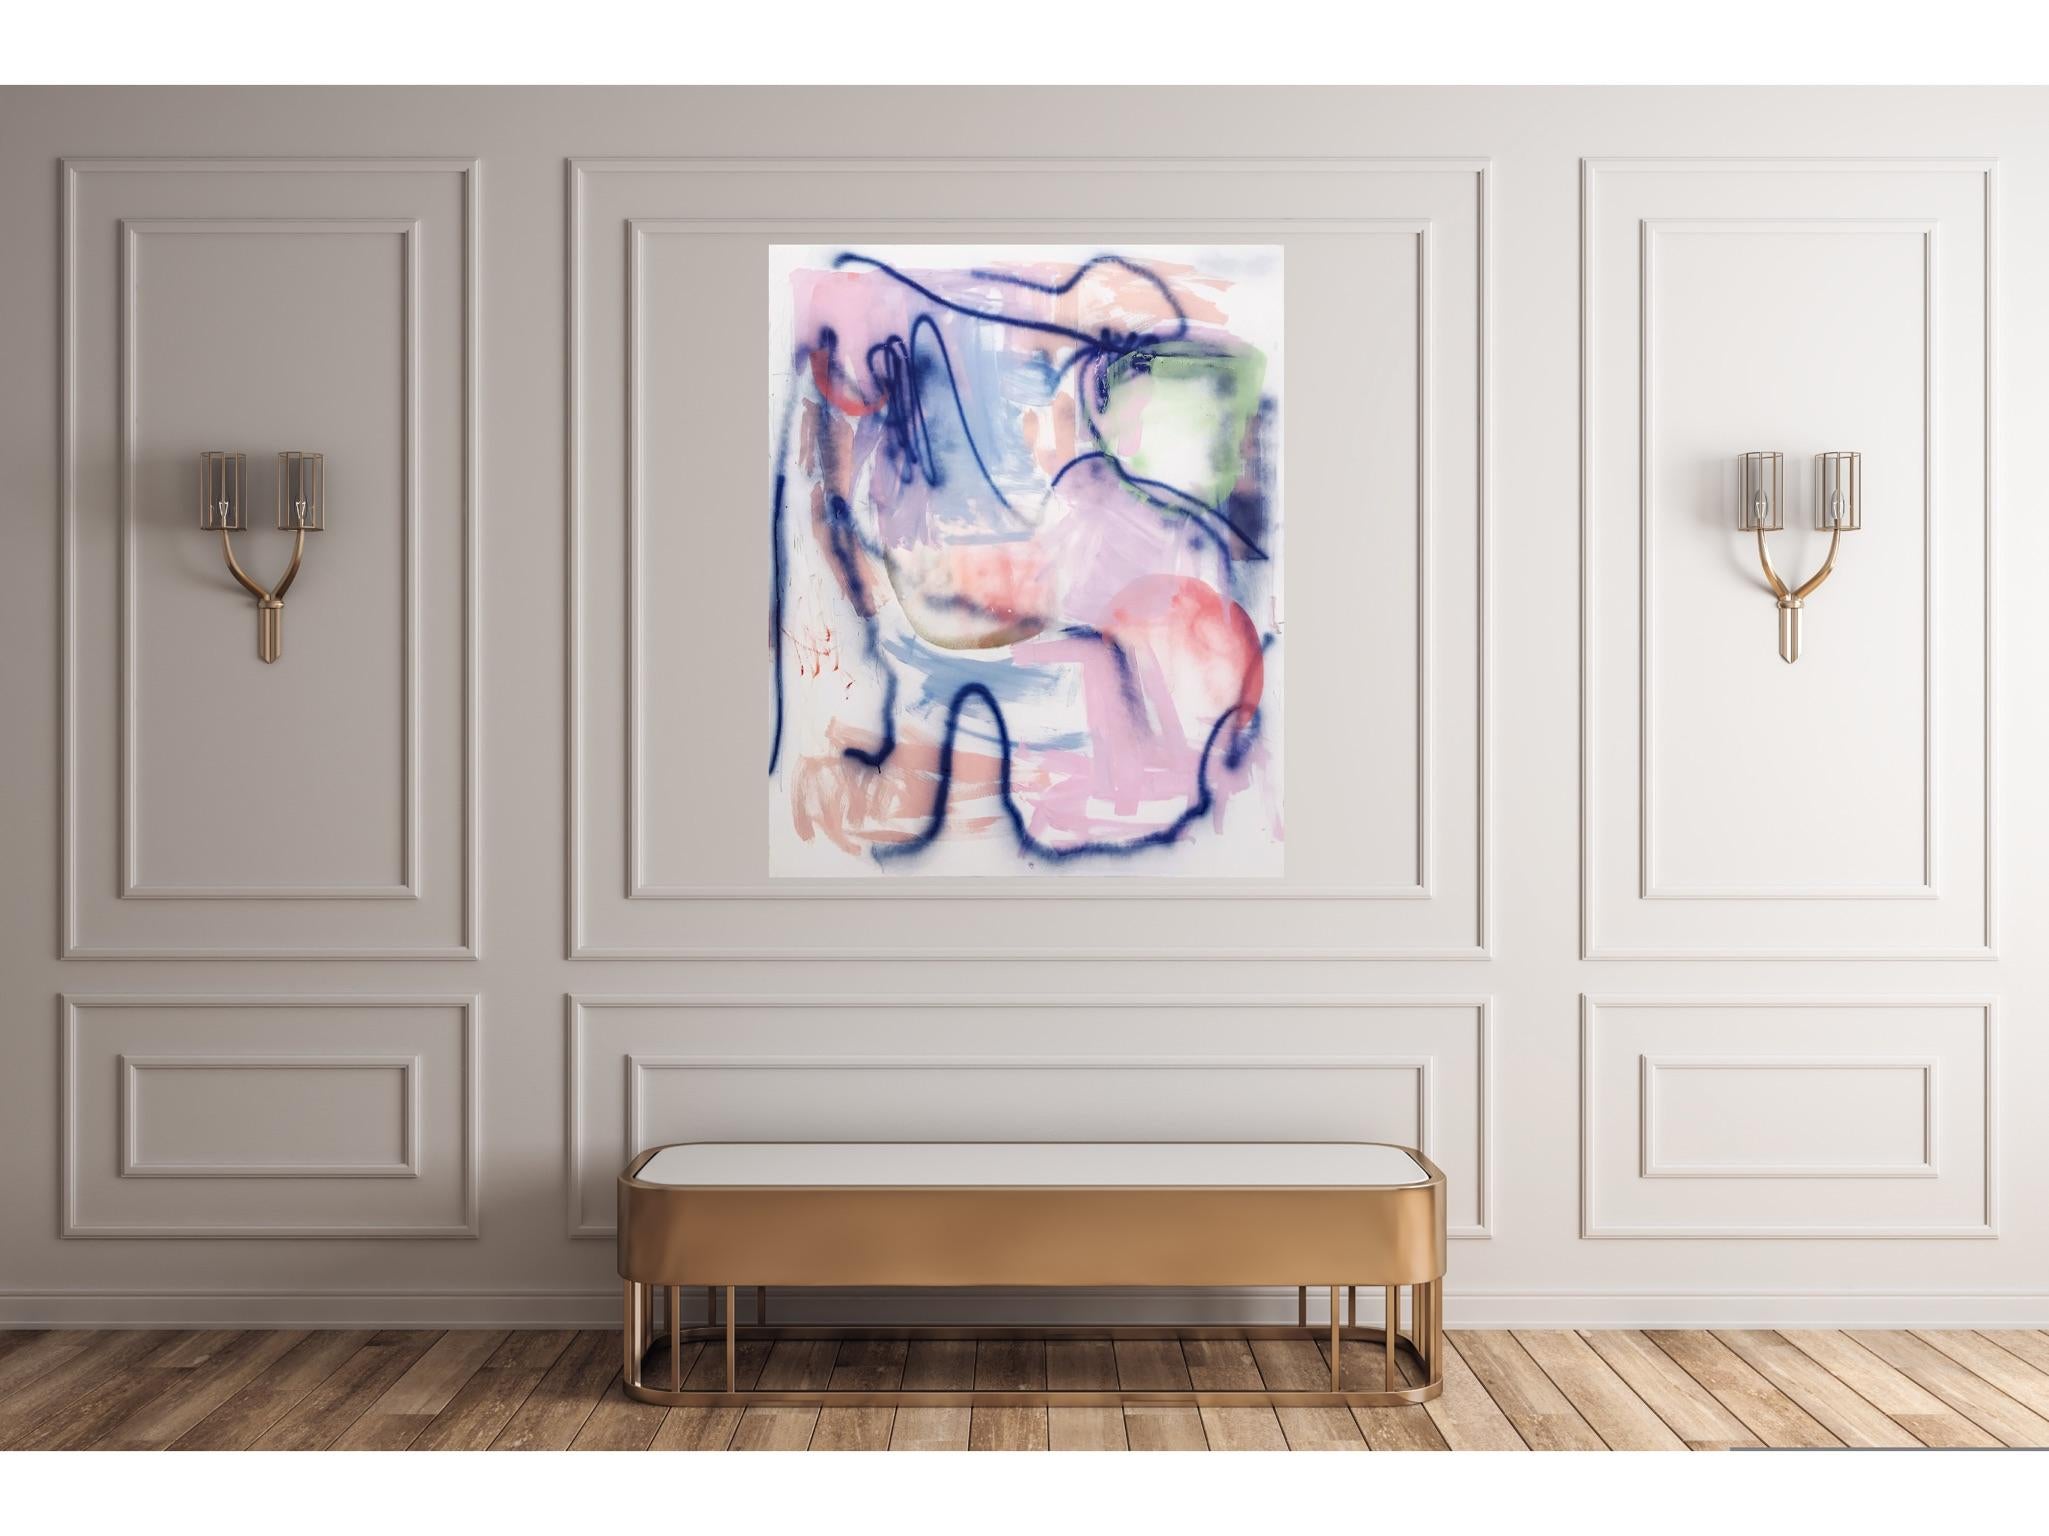 Imagine Candy-coloured Hail (Abstract painting) - Gray Abstract Painting by Manuela Karin Knaut